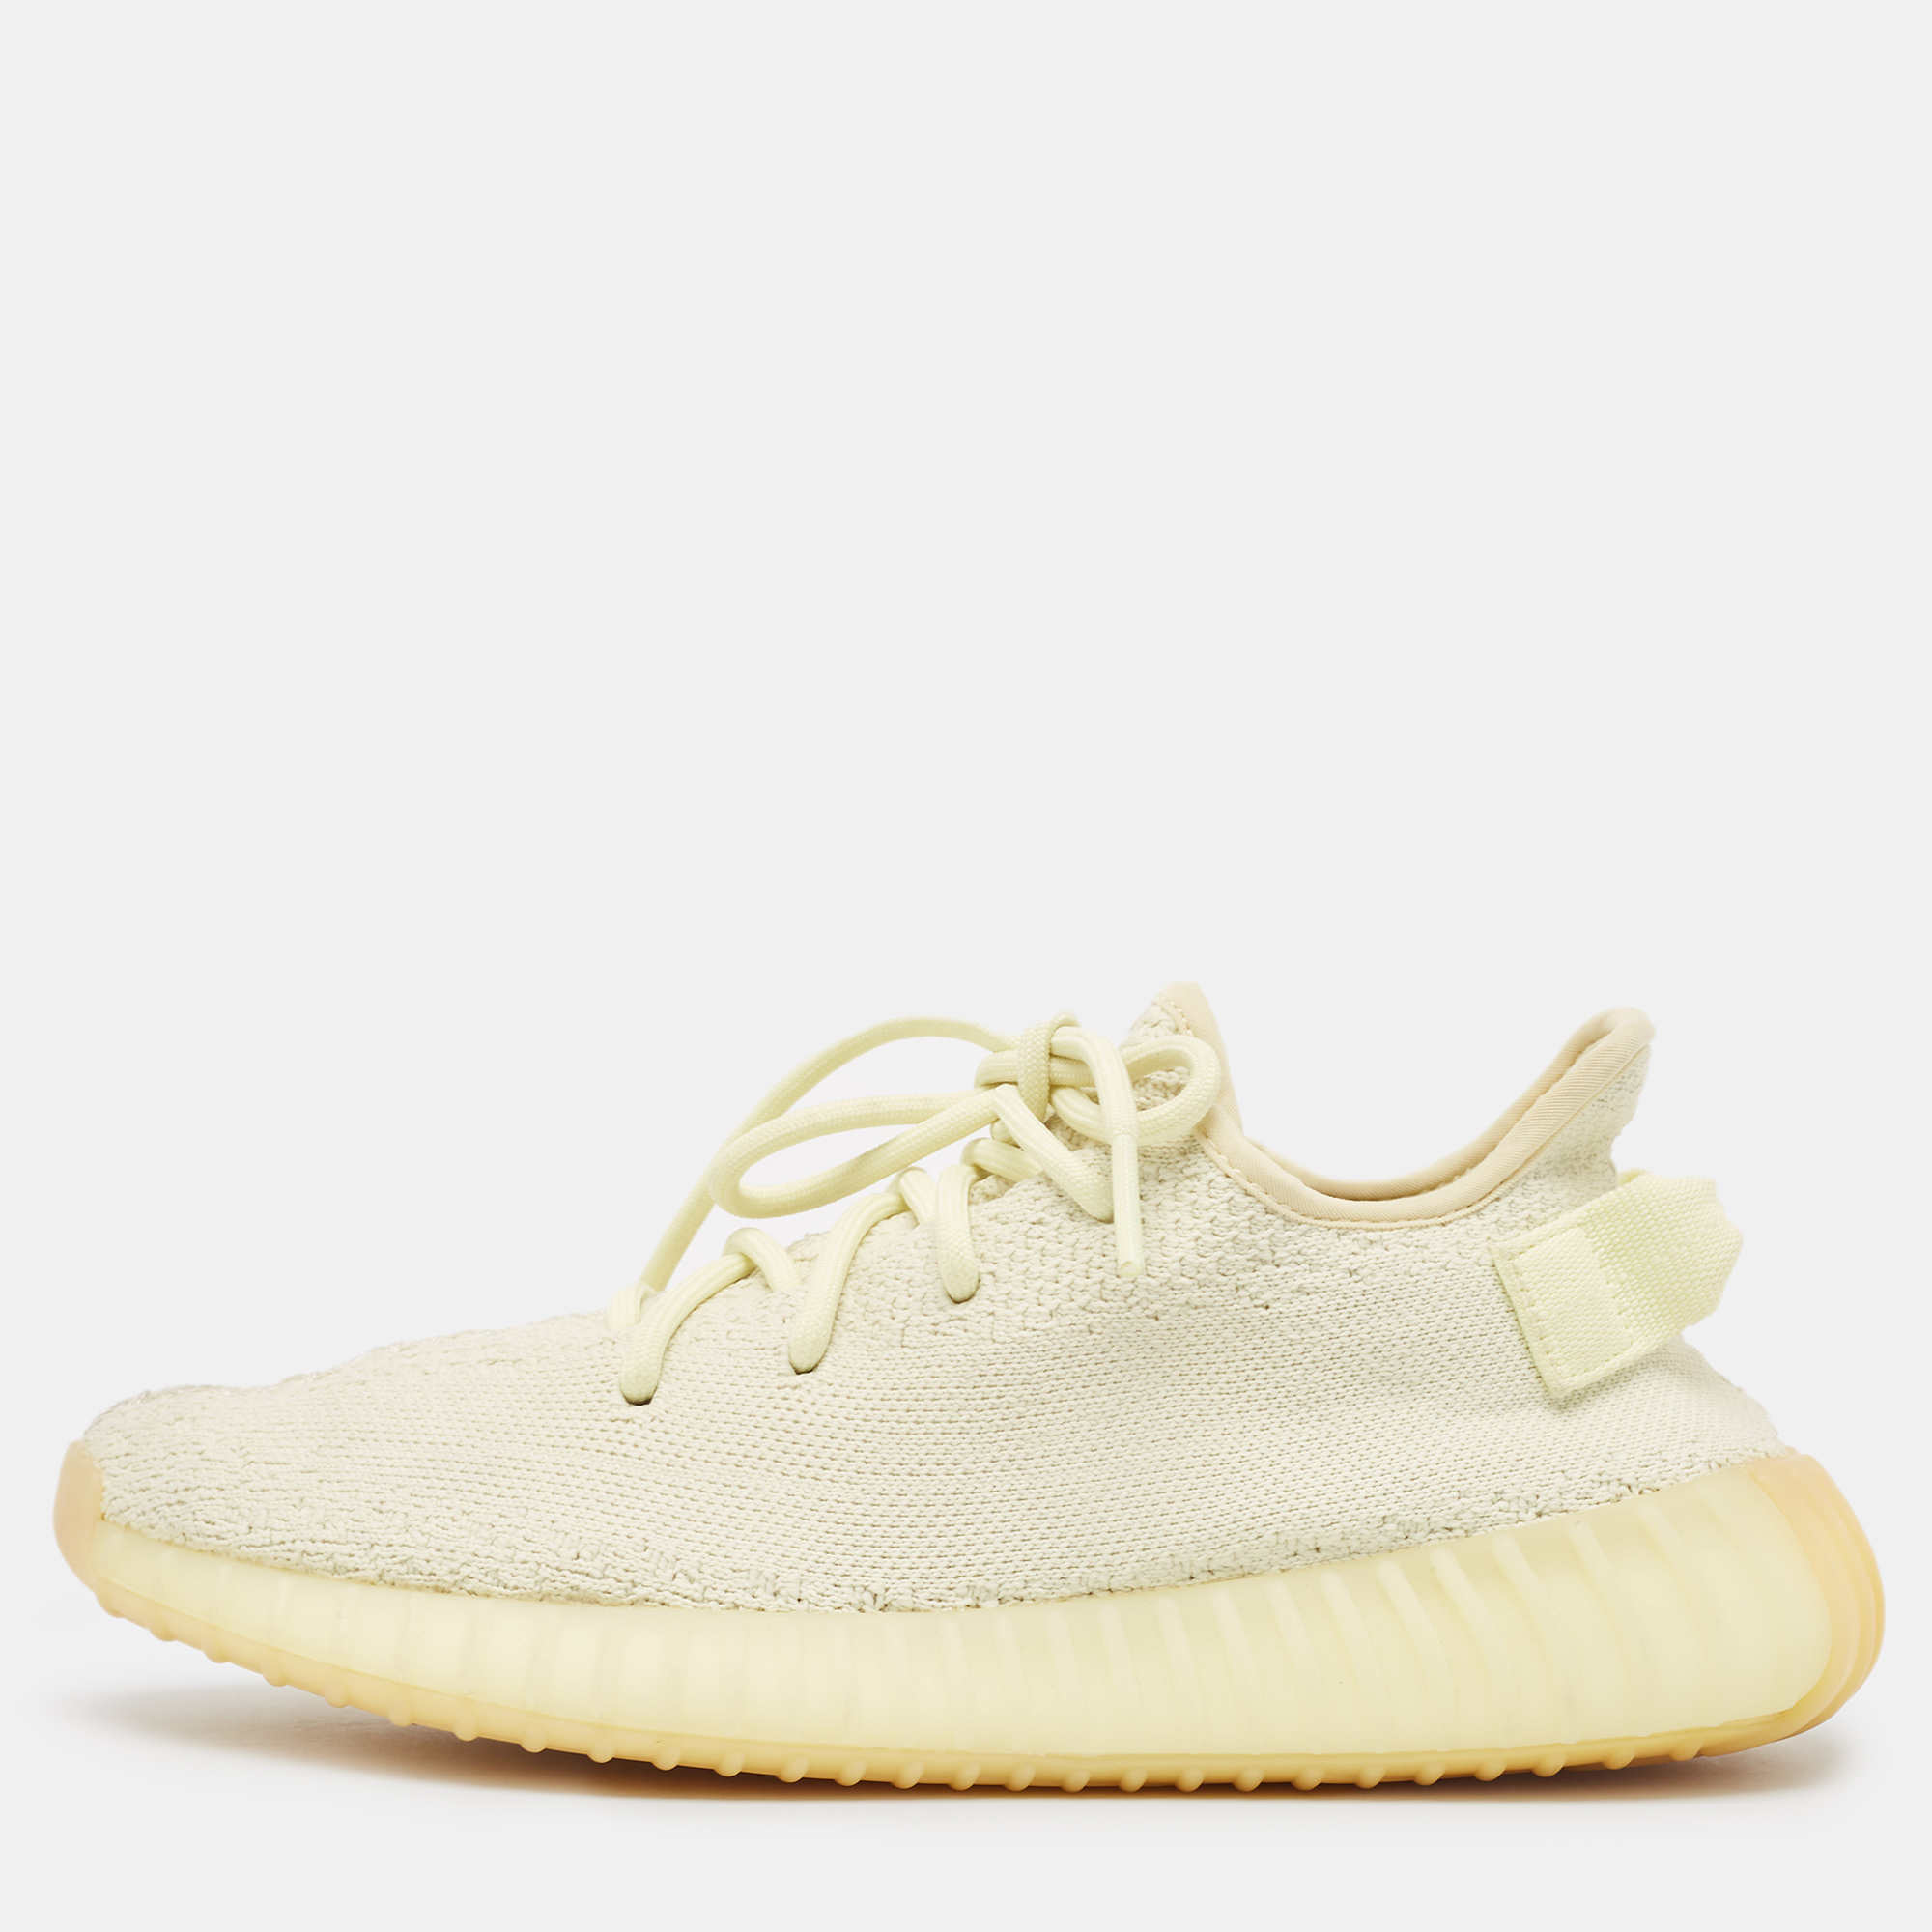 

Yeezy x Adidas Cream Knit Fabric Boost 350 V2 Butter Sneakers Size  1/3